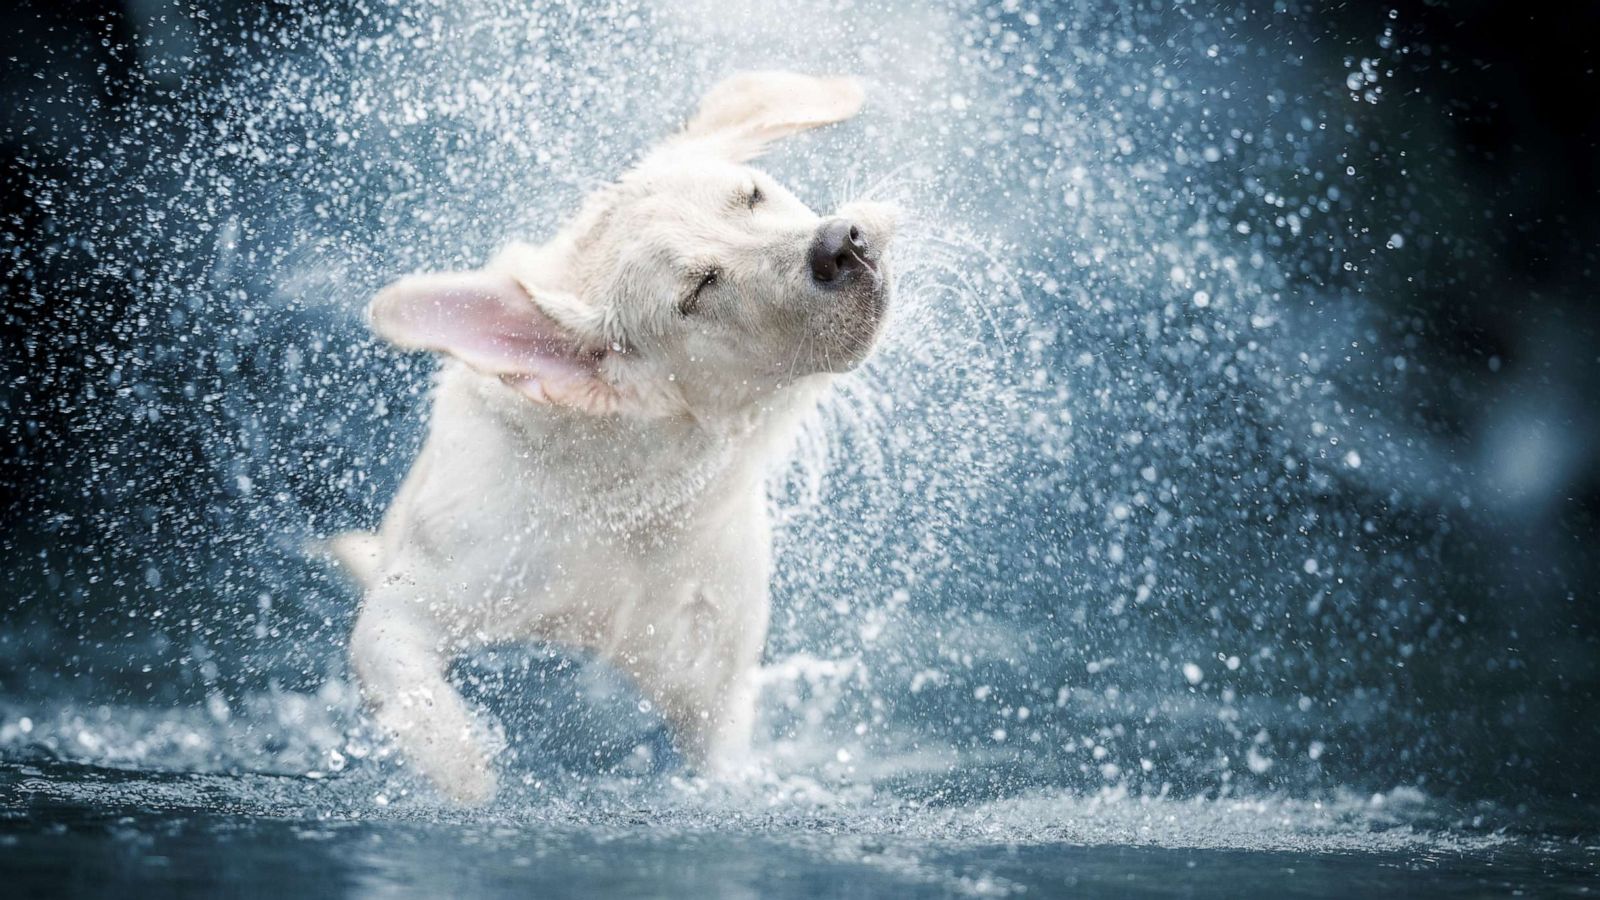 PHOTO: A dog shakes water off in this stock photo.